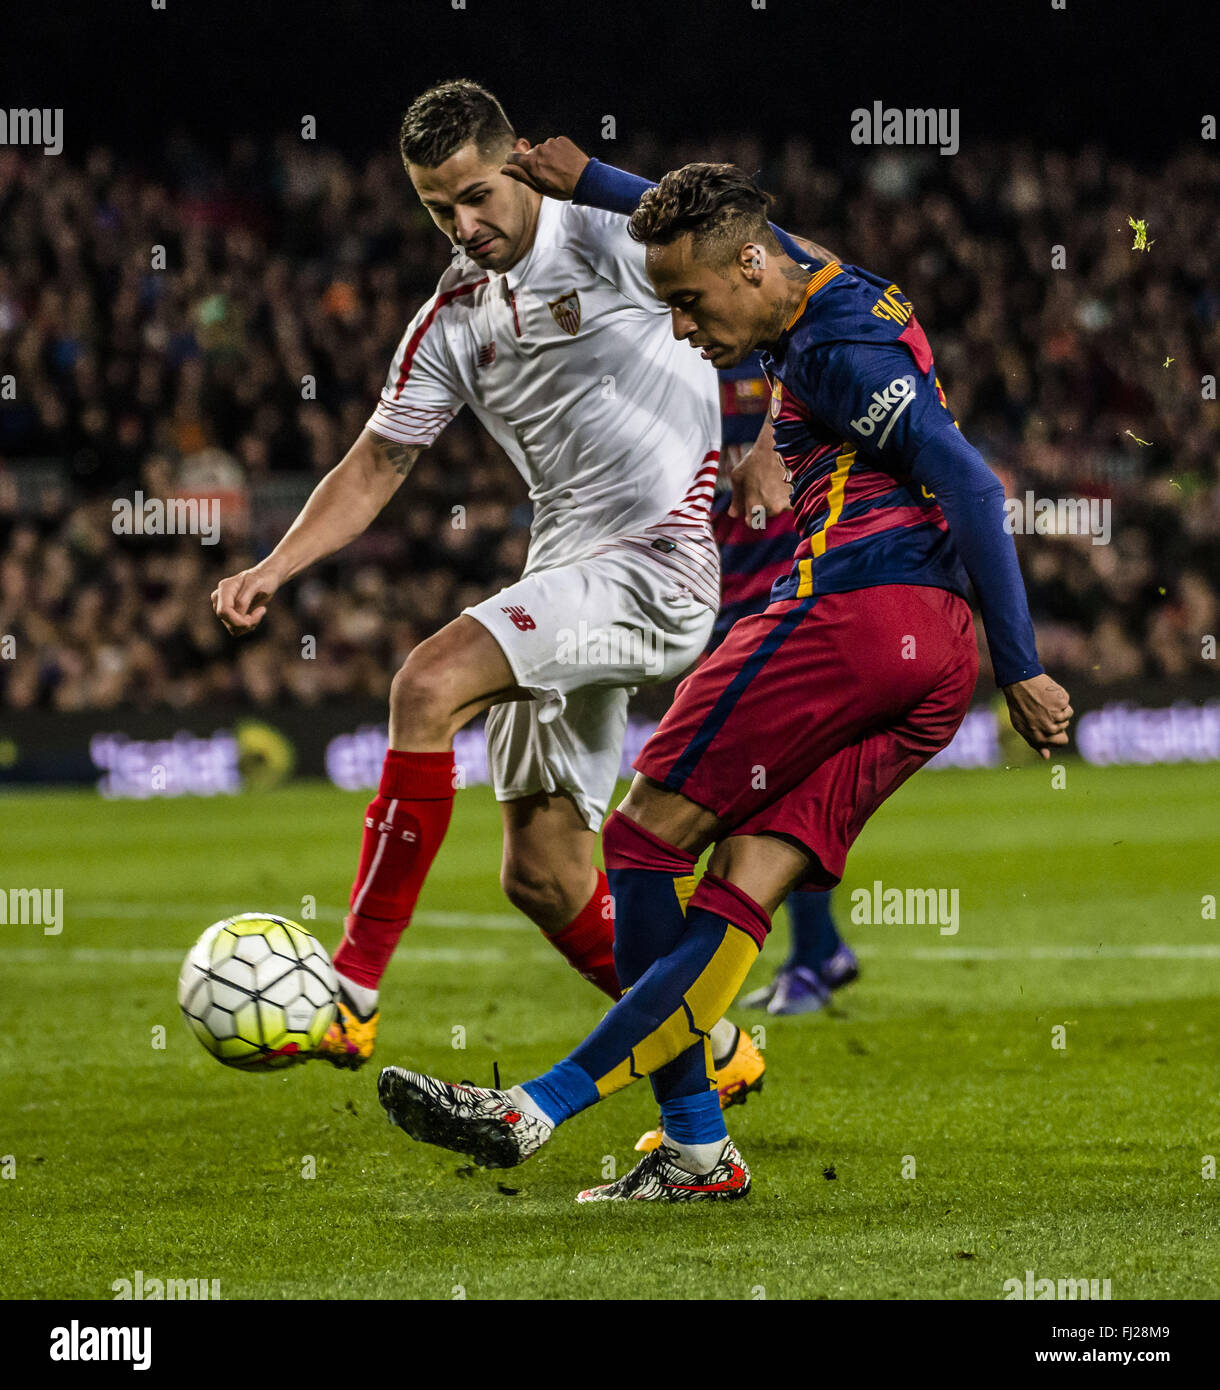 Barcelona, Catalonia, Spain. 28th Feb, 2016. FC Barcelona forward NEYMAR JR. in action against the Sevilla FC in the BBVA league match between FC Barcelona and Sevilla FC at the Camp Nou stadium in Barcelona Credit:  Matthias Oesterle/ZUMA Wire/Alamy Live News Stock Photo